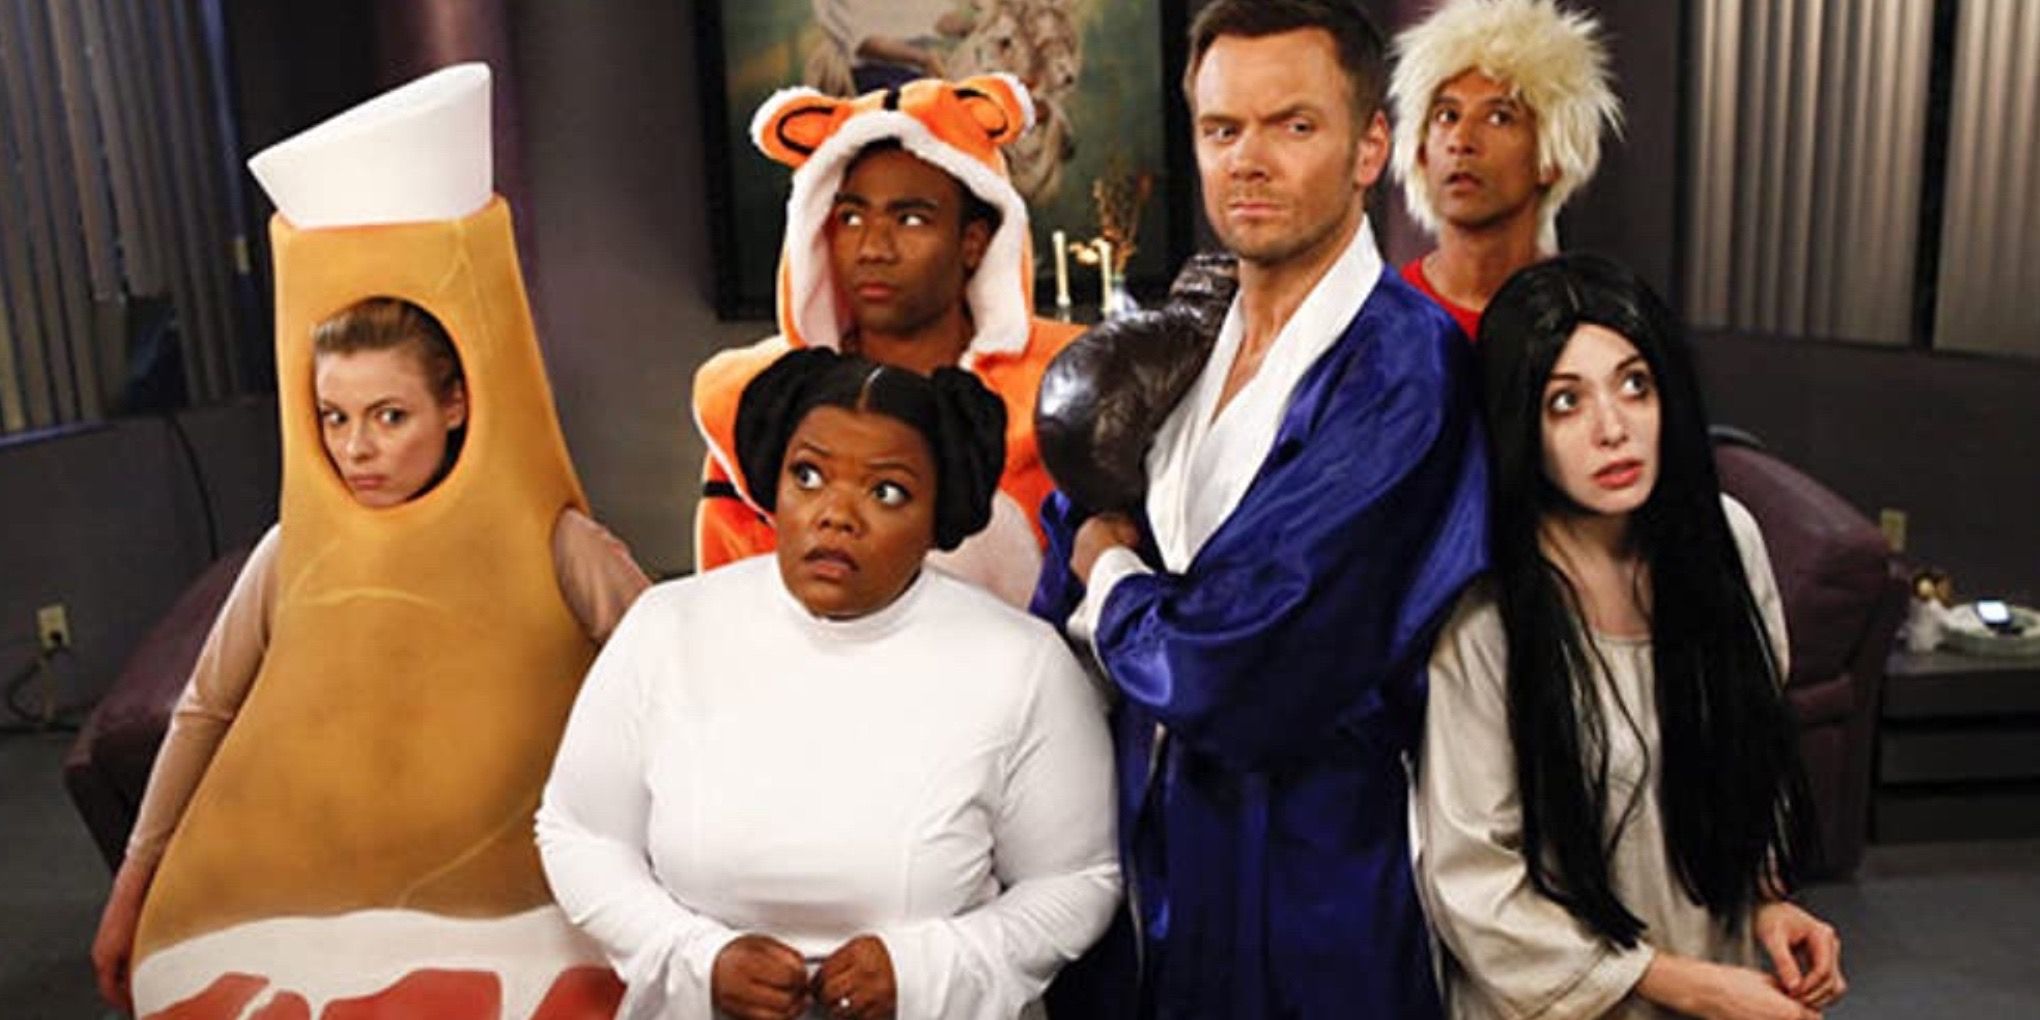 A still from Community’s “Paranormal Parentage” episode